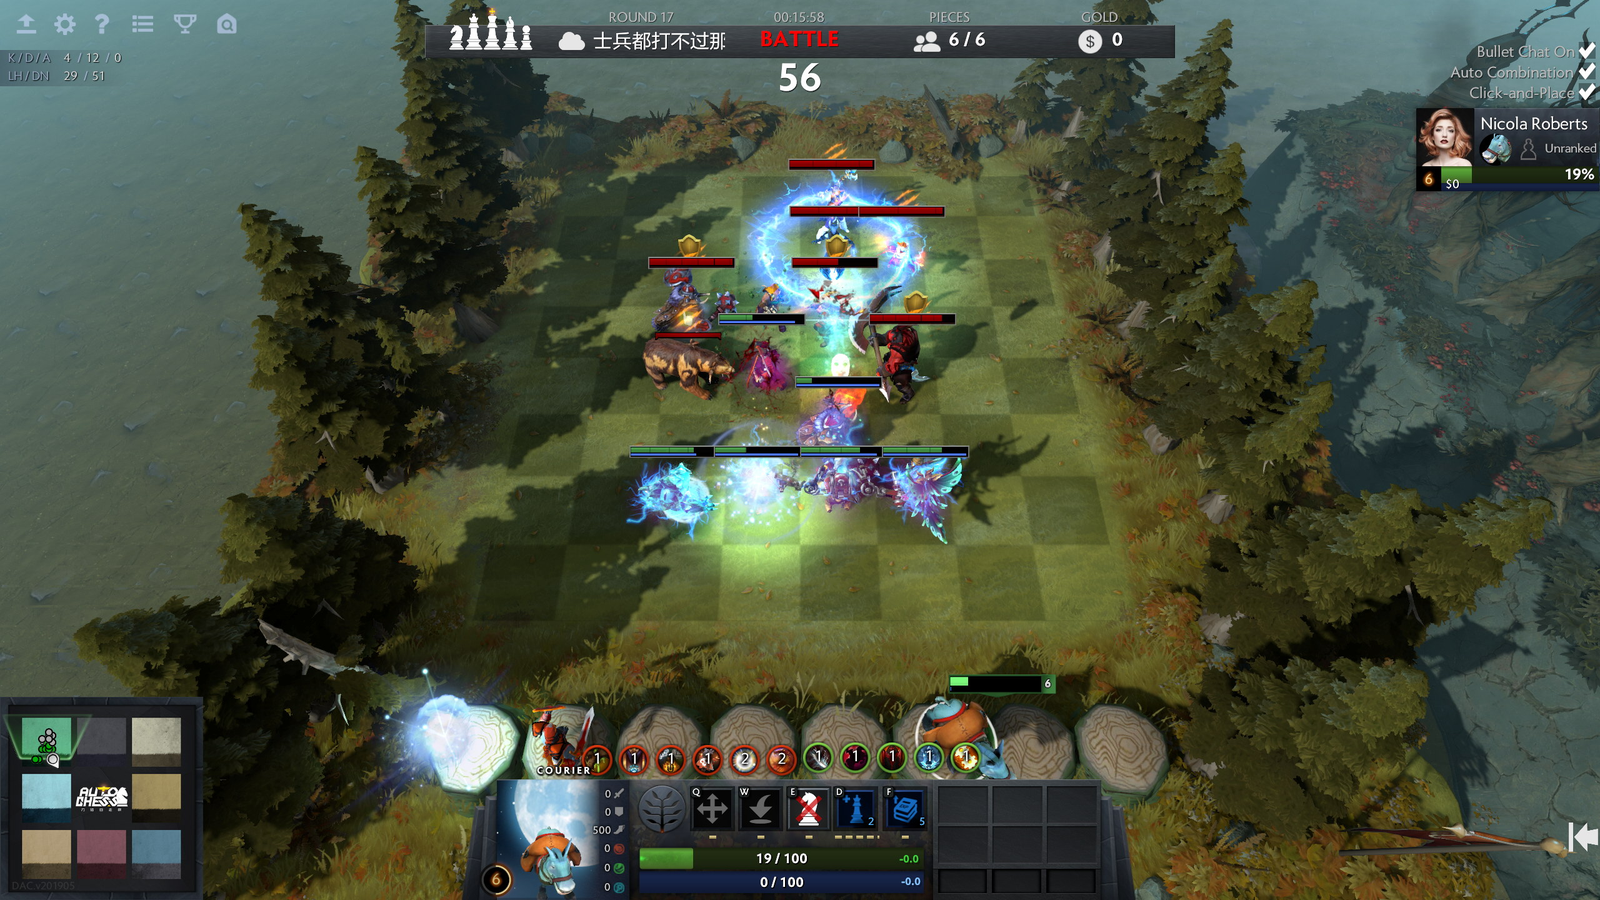 Steam Community :: Guide :: How to decide what to play in Dota Auto Chess